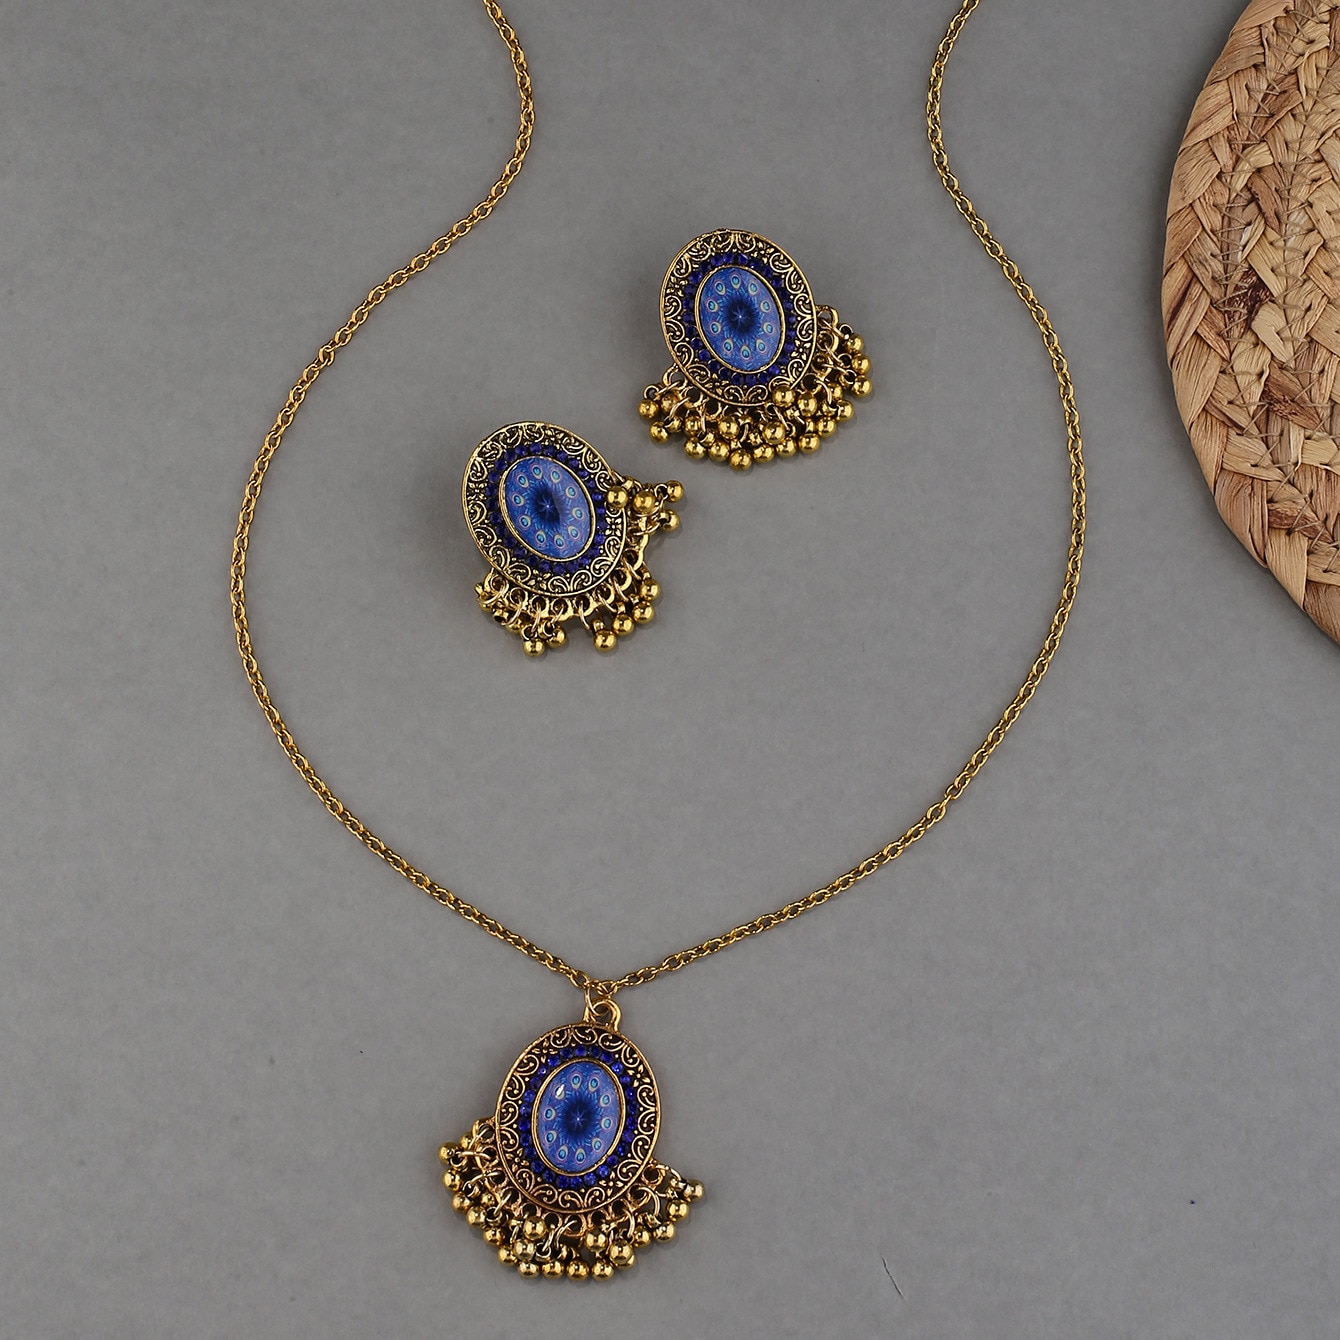 Afghan-Vintage-Tribal-Blue-Flower-Statement-Necklace-Earring-Jewelry-Sets-Gold-Color-Indian-Chain-Ne-3256804350070961-5